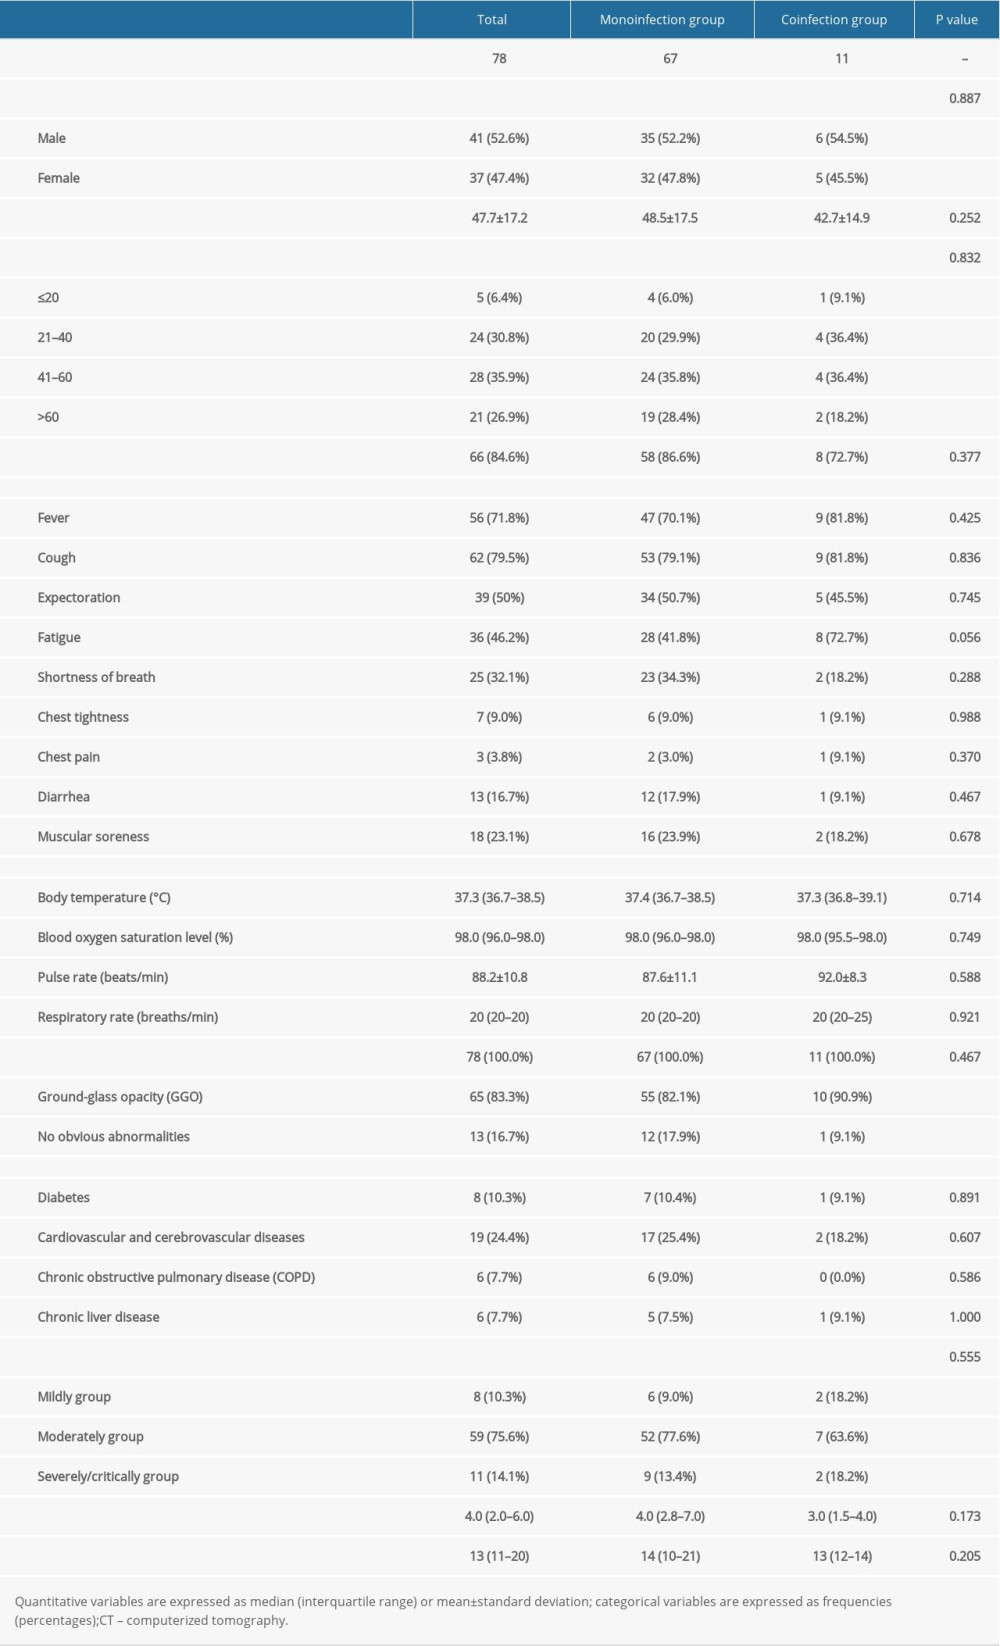 Comparisons of clinical characteristics between co-infected and mono-infected COVID-19 patients with univariate analysis.